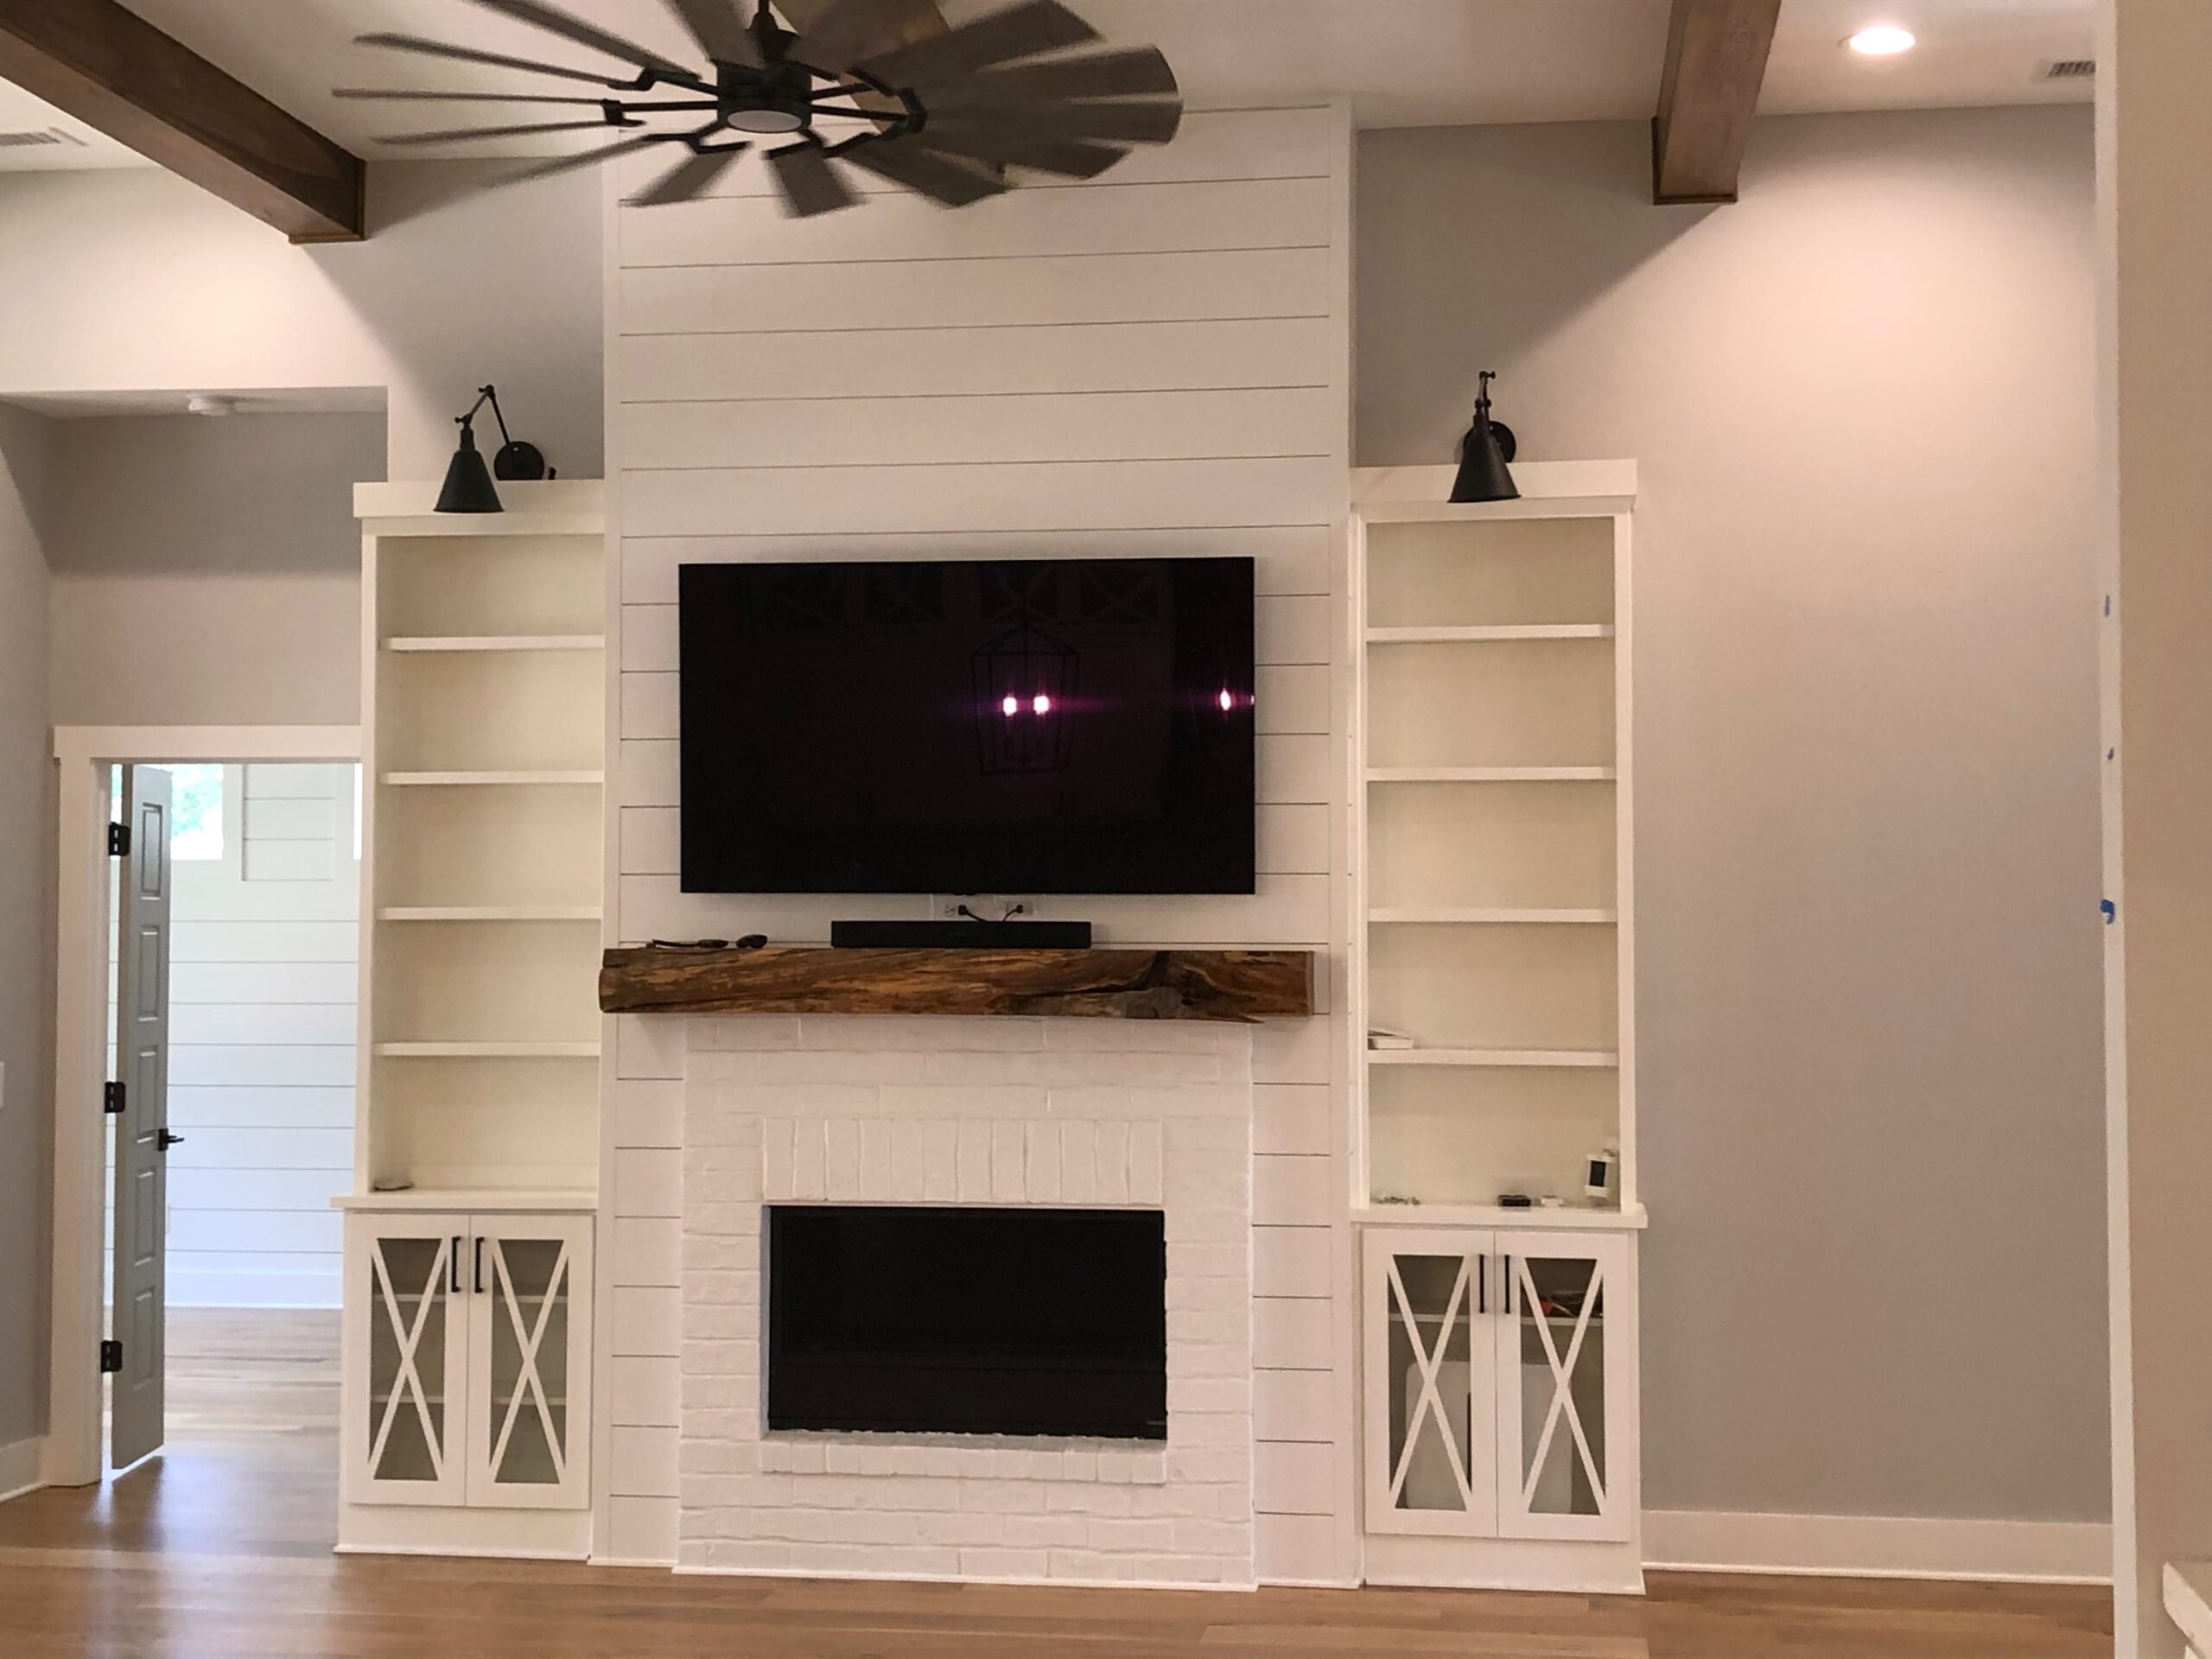 A completed renovation of a client's common area or living room, which shows added shelves and mantle.